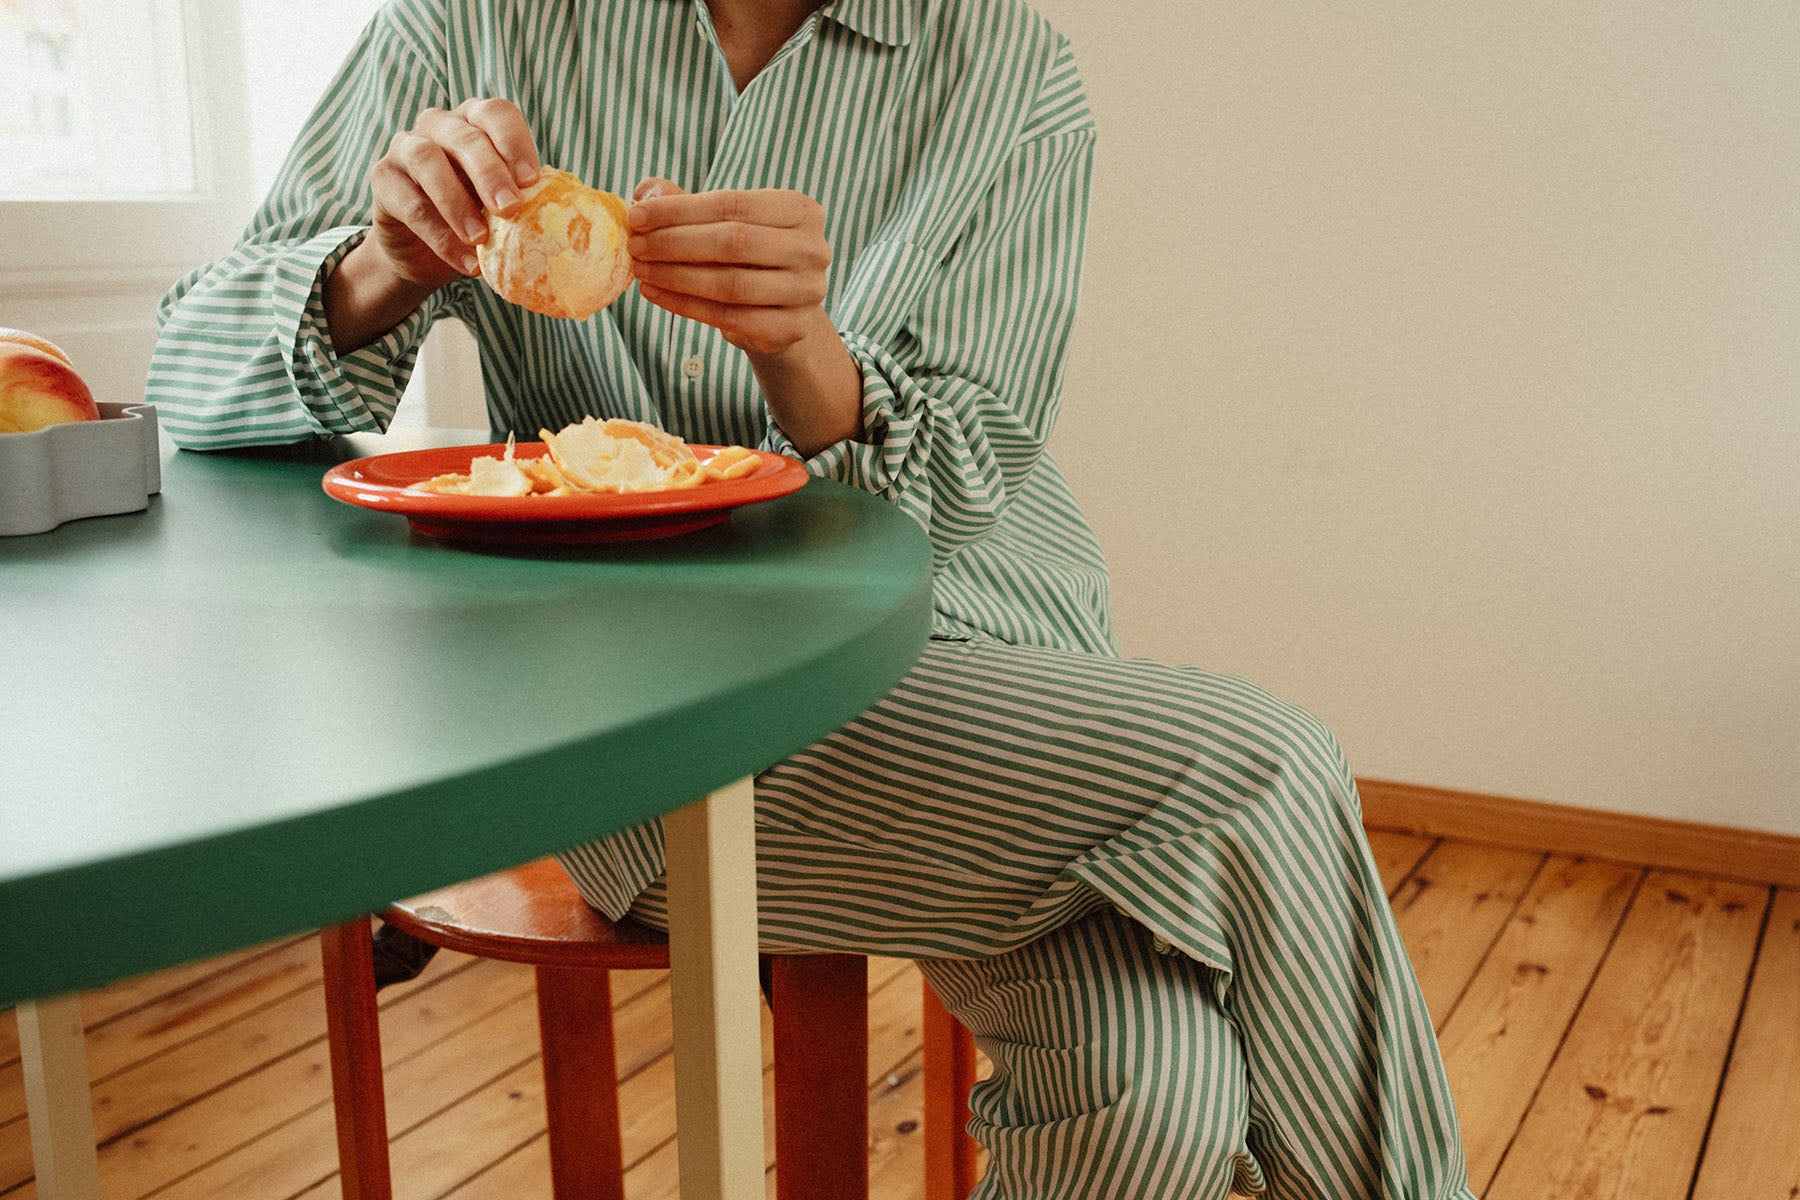 A woman in striped pyjamas is sitting at a table, peeling oranges